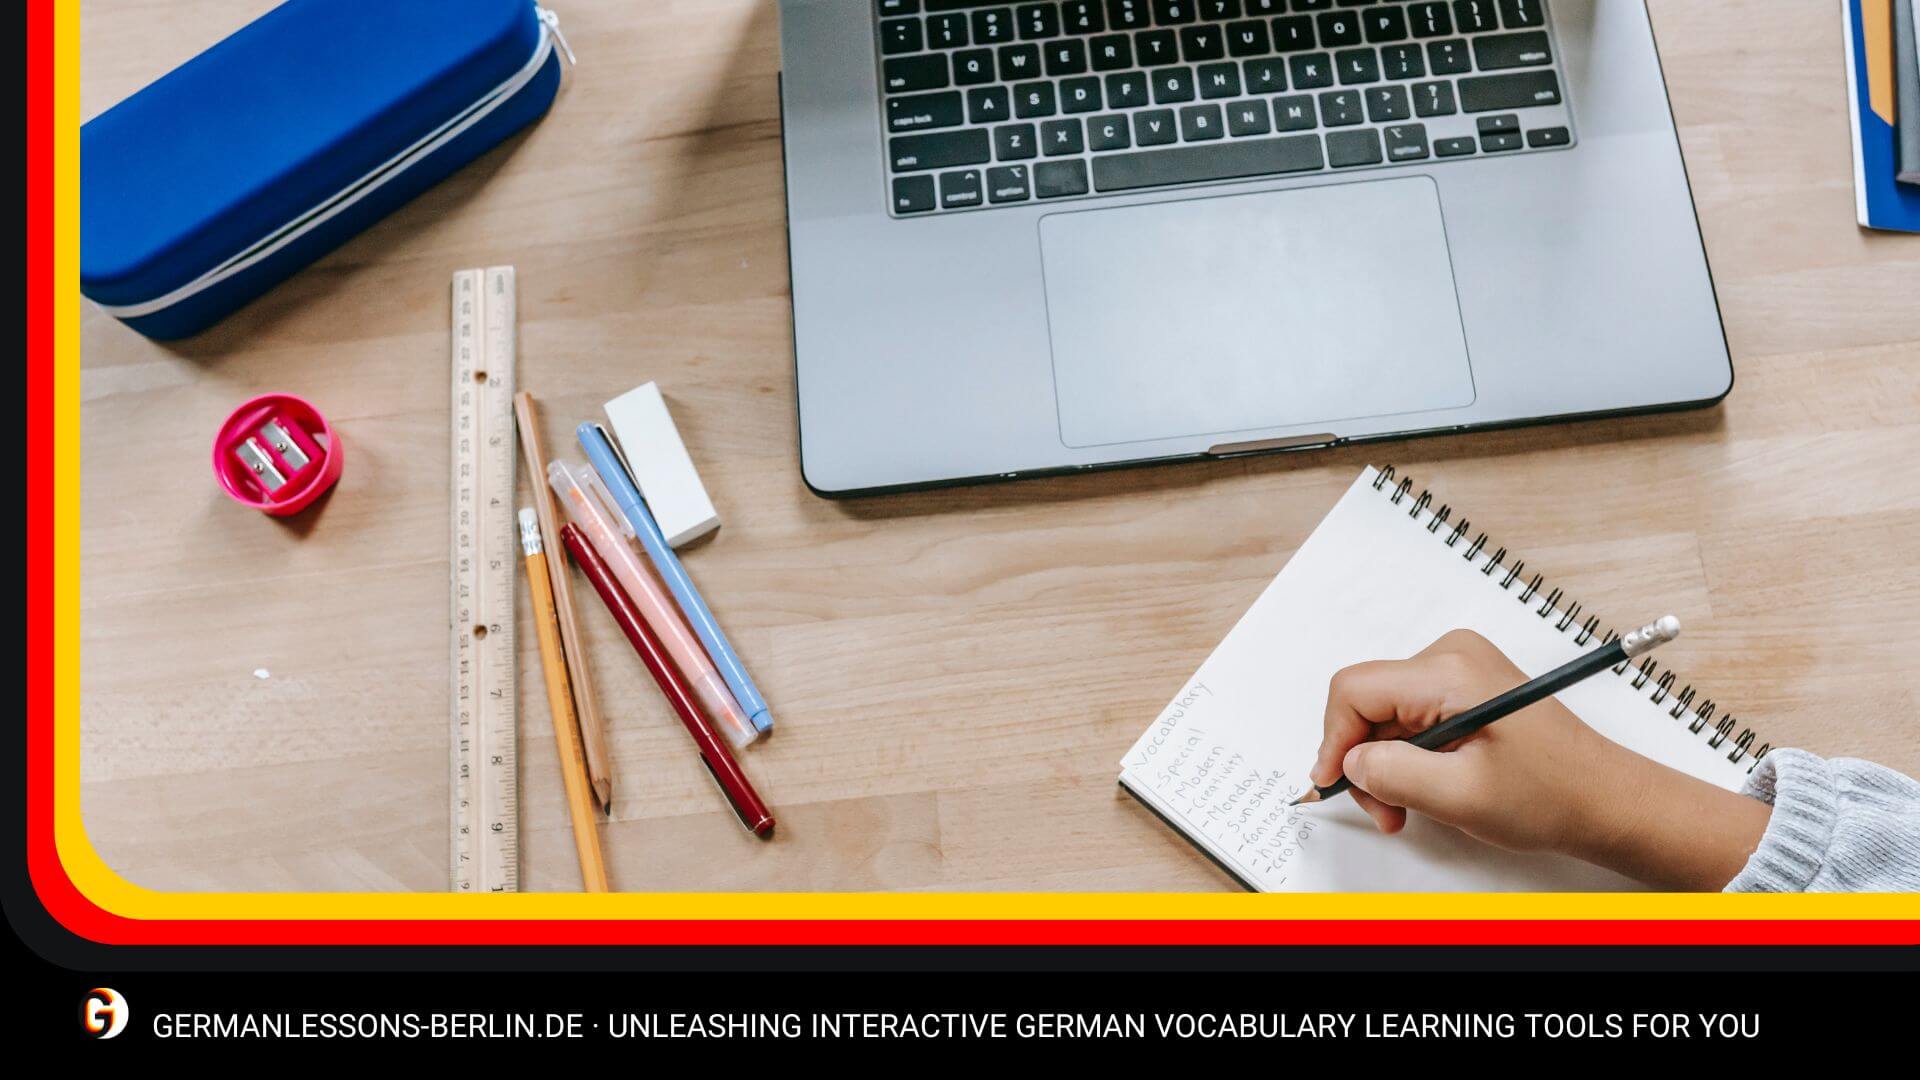 Unleashing Interactive German Vocabulary Learning Tools for You